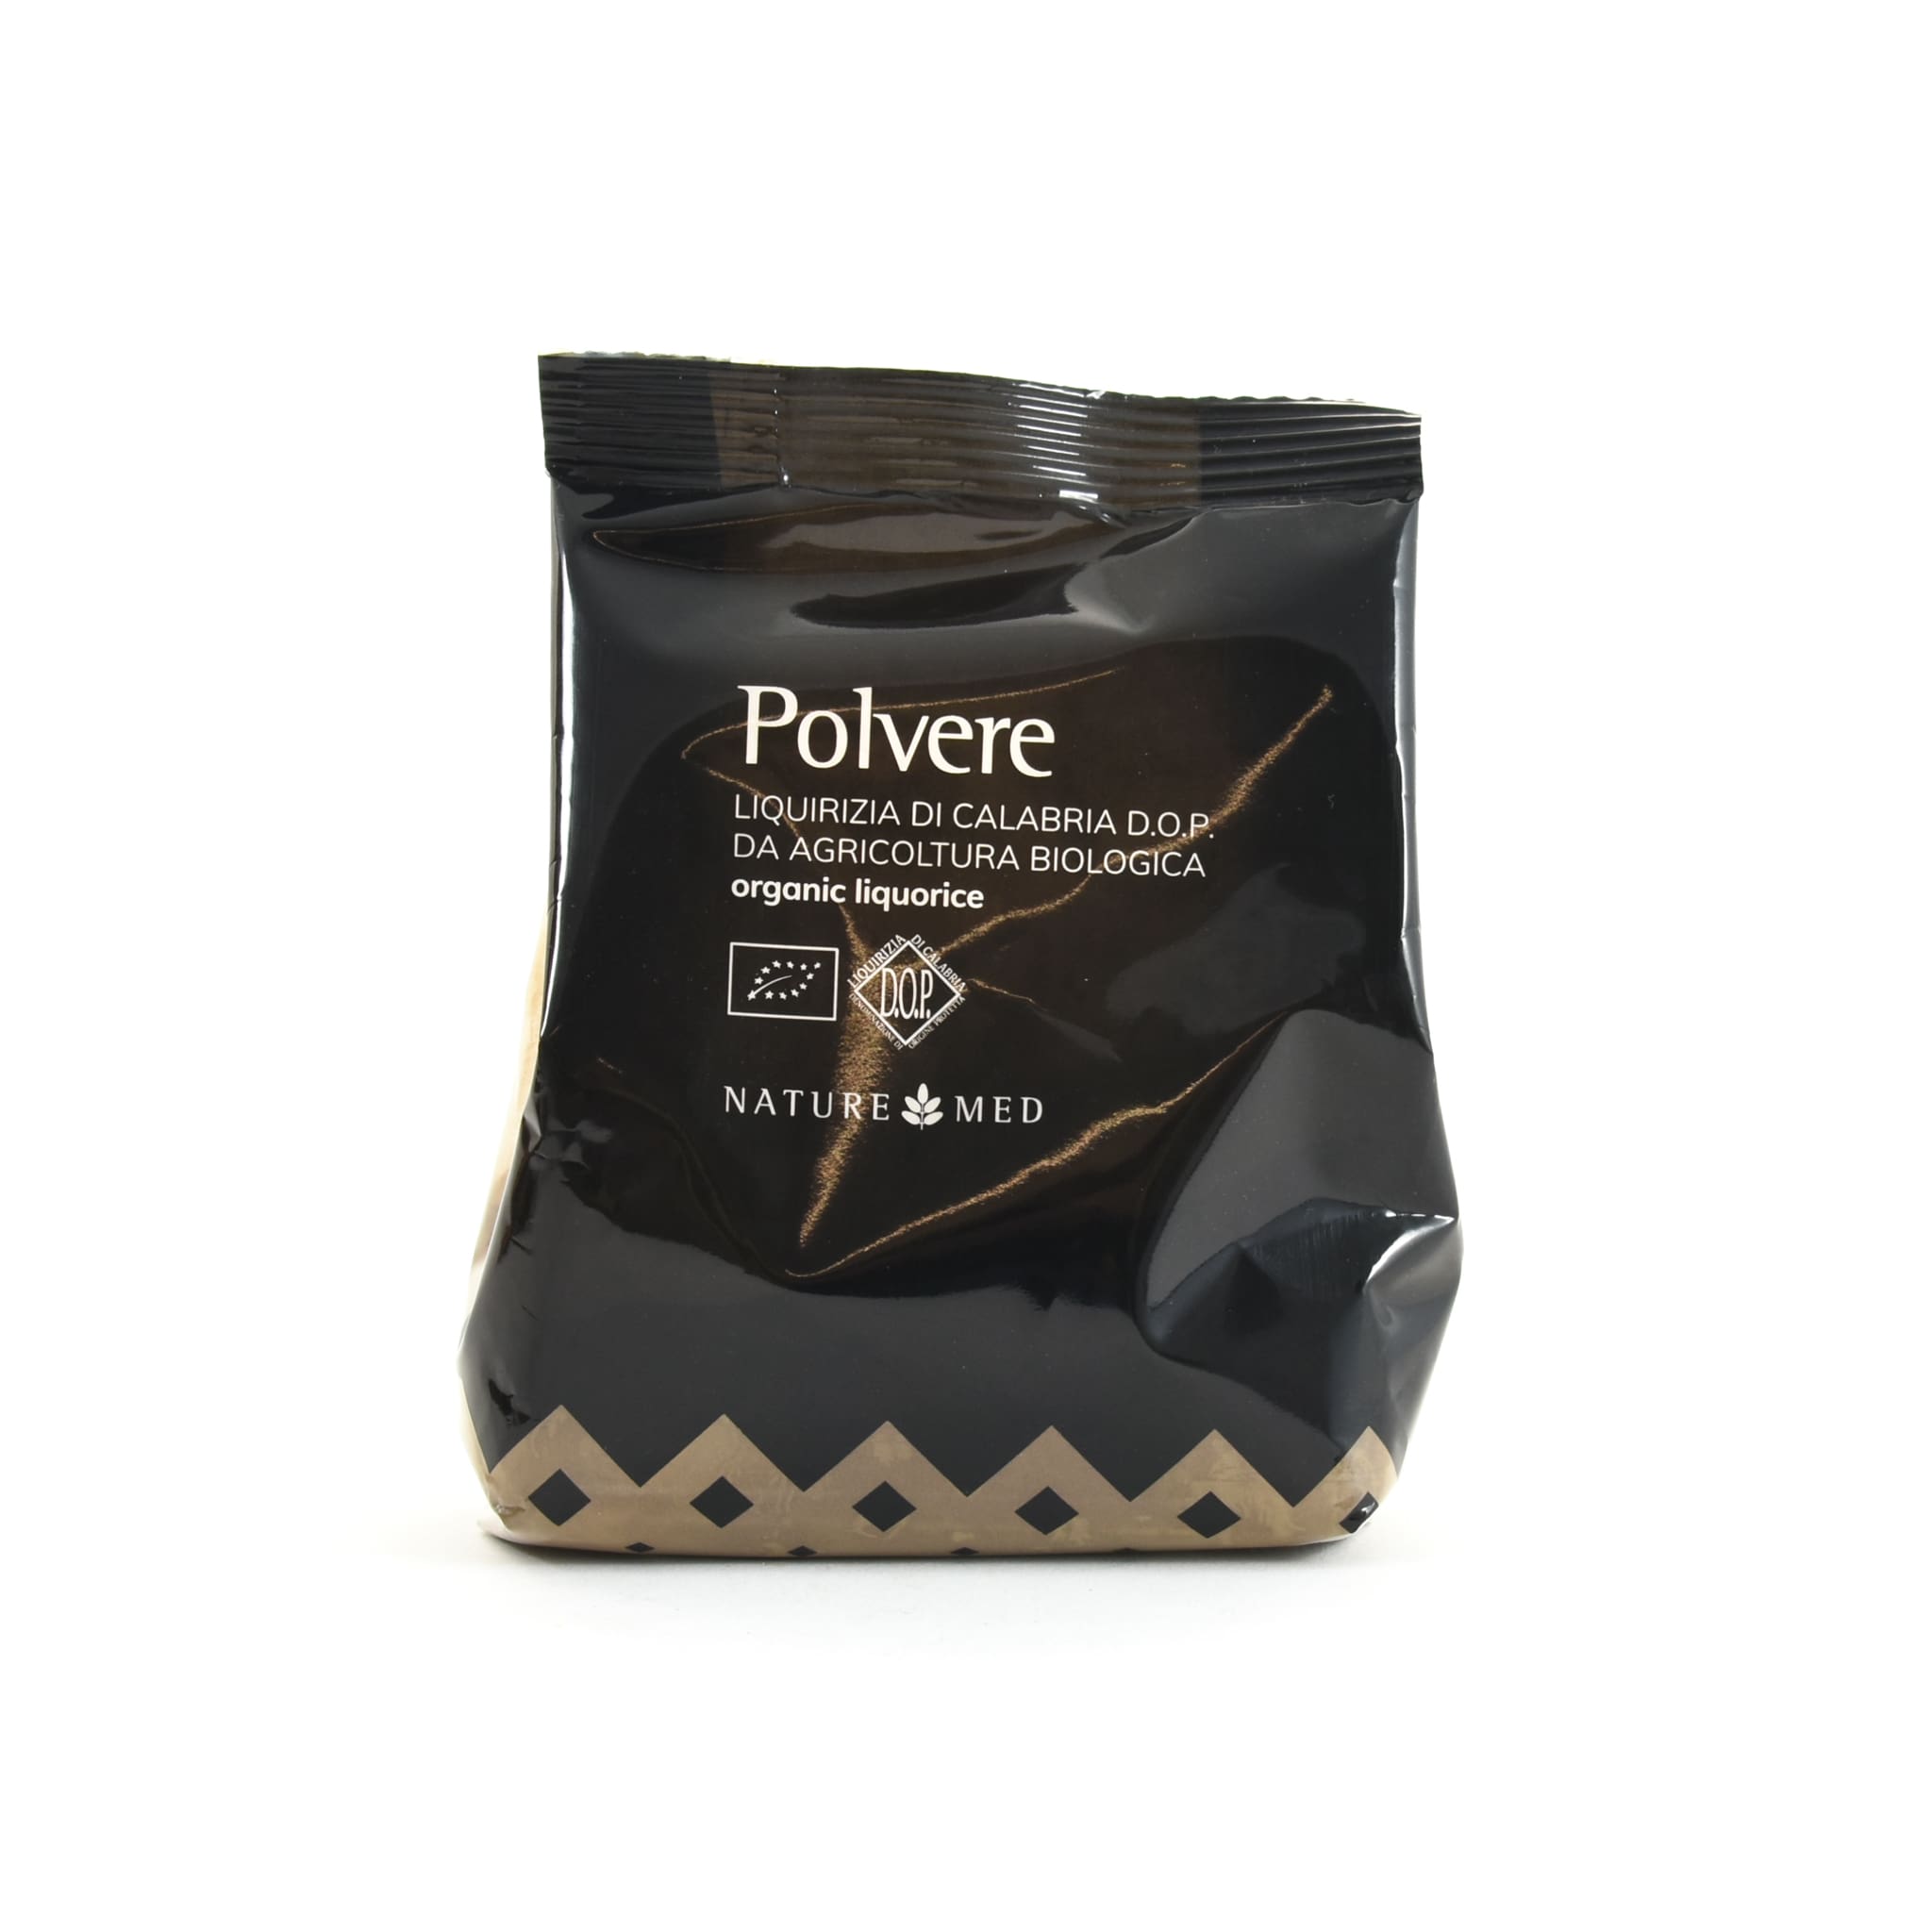 Powdered Liquorice From Calabria, 100g